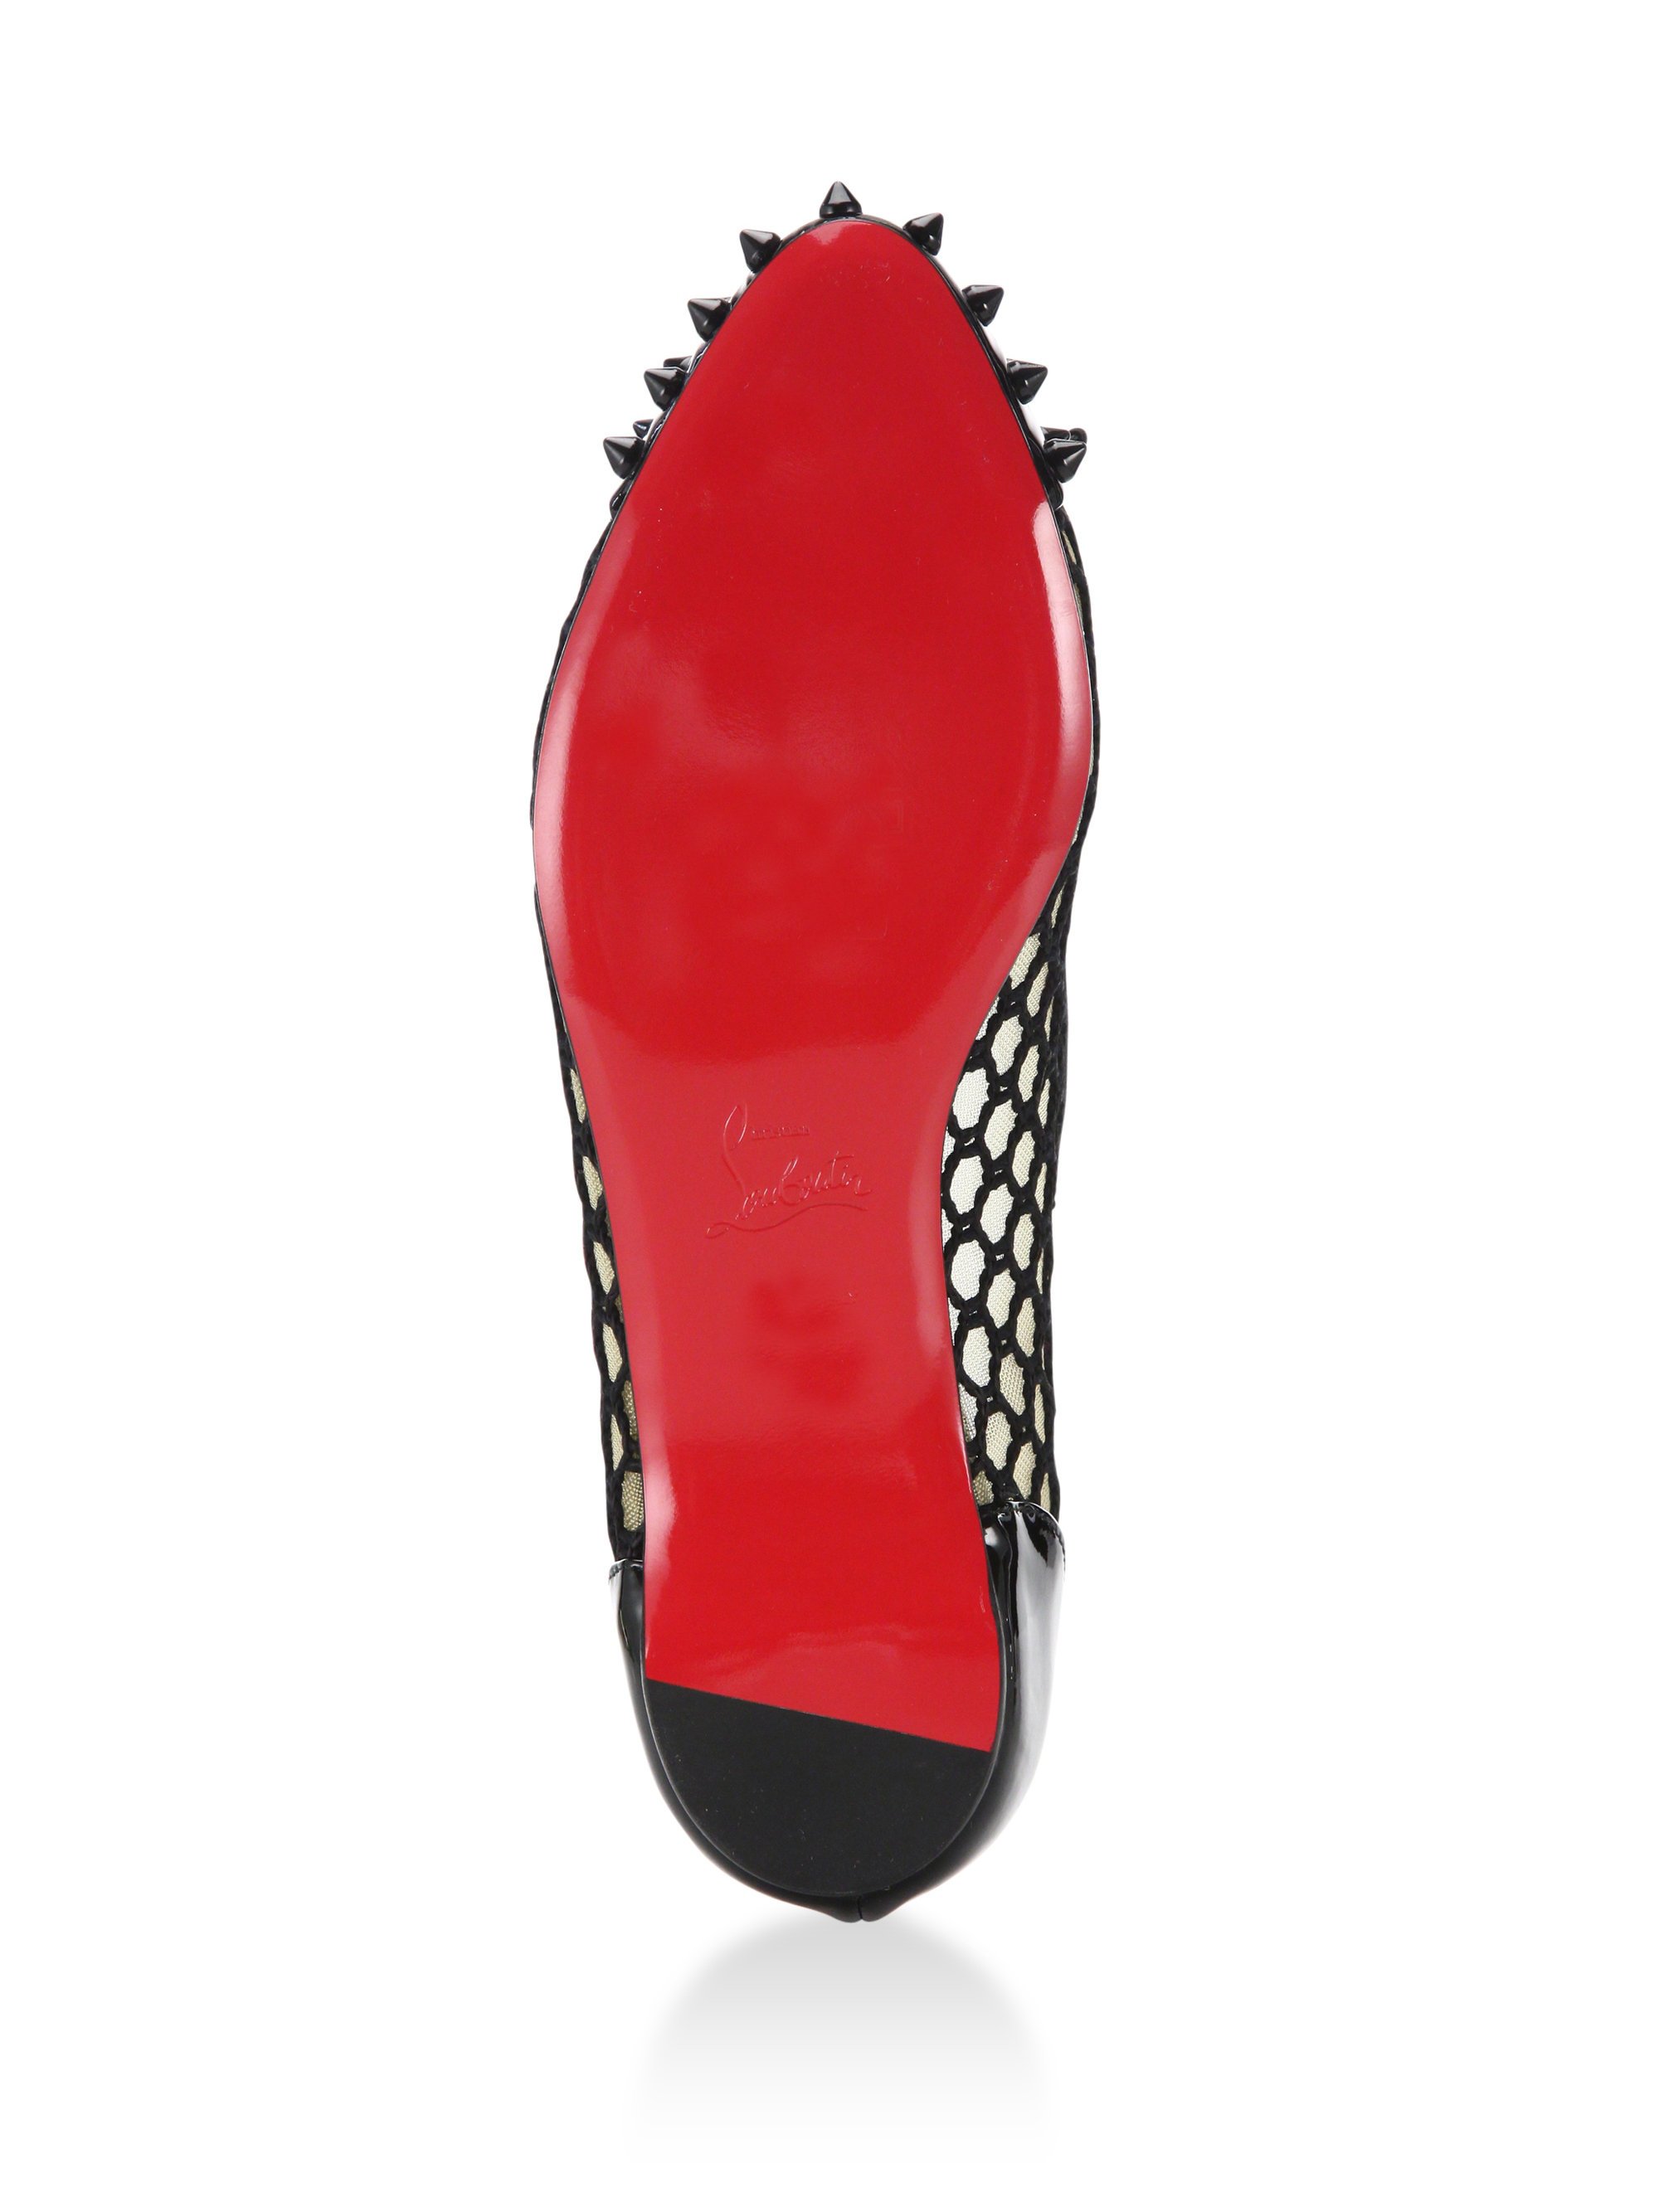 spiked loafers cheap - Christian louboutin Mix Patent Spiked Knotted Mesh Flats in Black ...